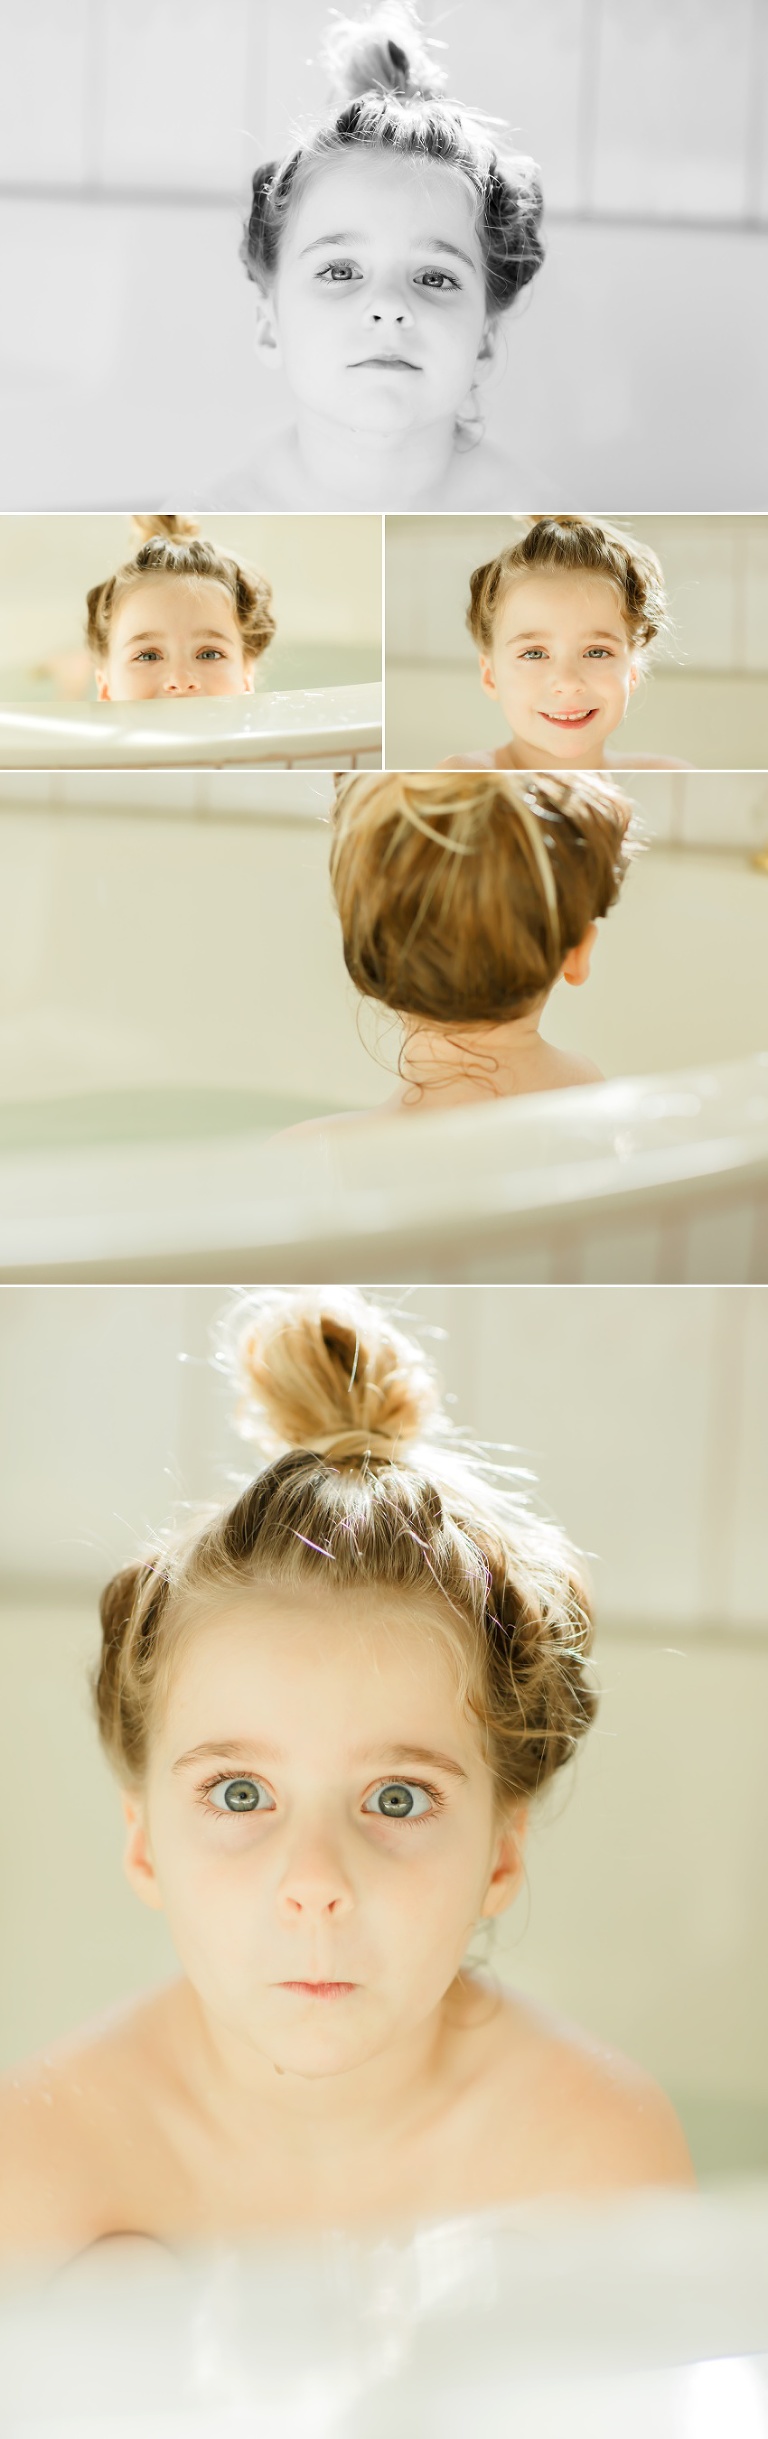 Lifestyle family pictures in El Dorado Hills for my little 4 year old during bath time by Colleen Sanders Photography.